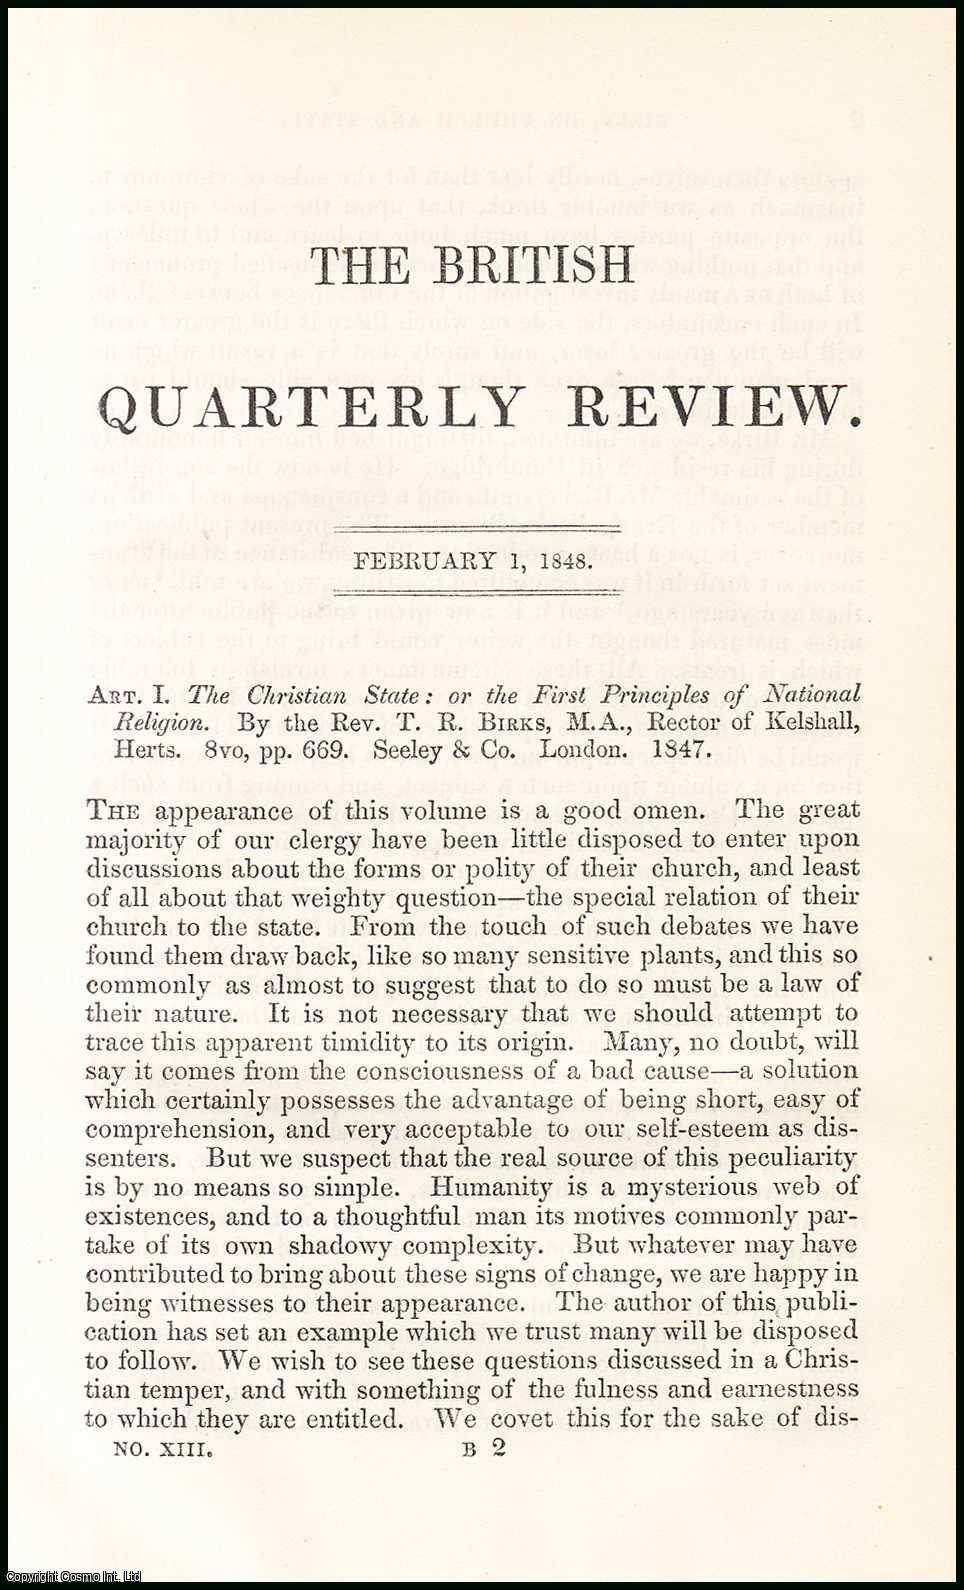 Robert Vaughan - The Christian State : or the First Principles of National Religion. By the Rev. T.R. Birks, M.A., Rector of kelshall, Herts. A rare original article from the British Quarterly Review, 1848.